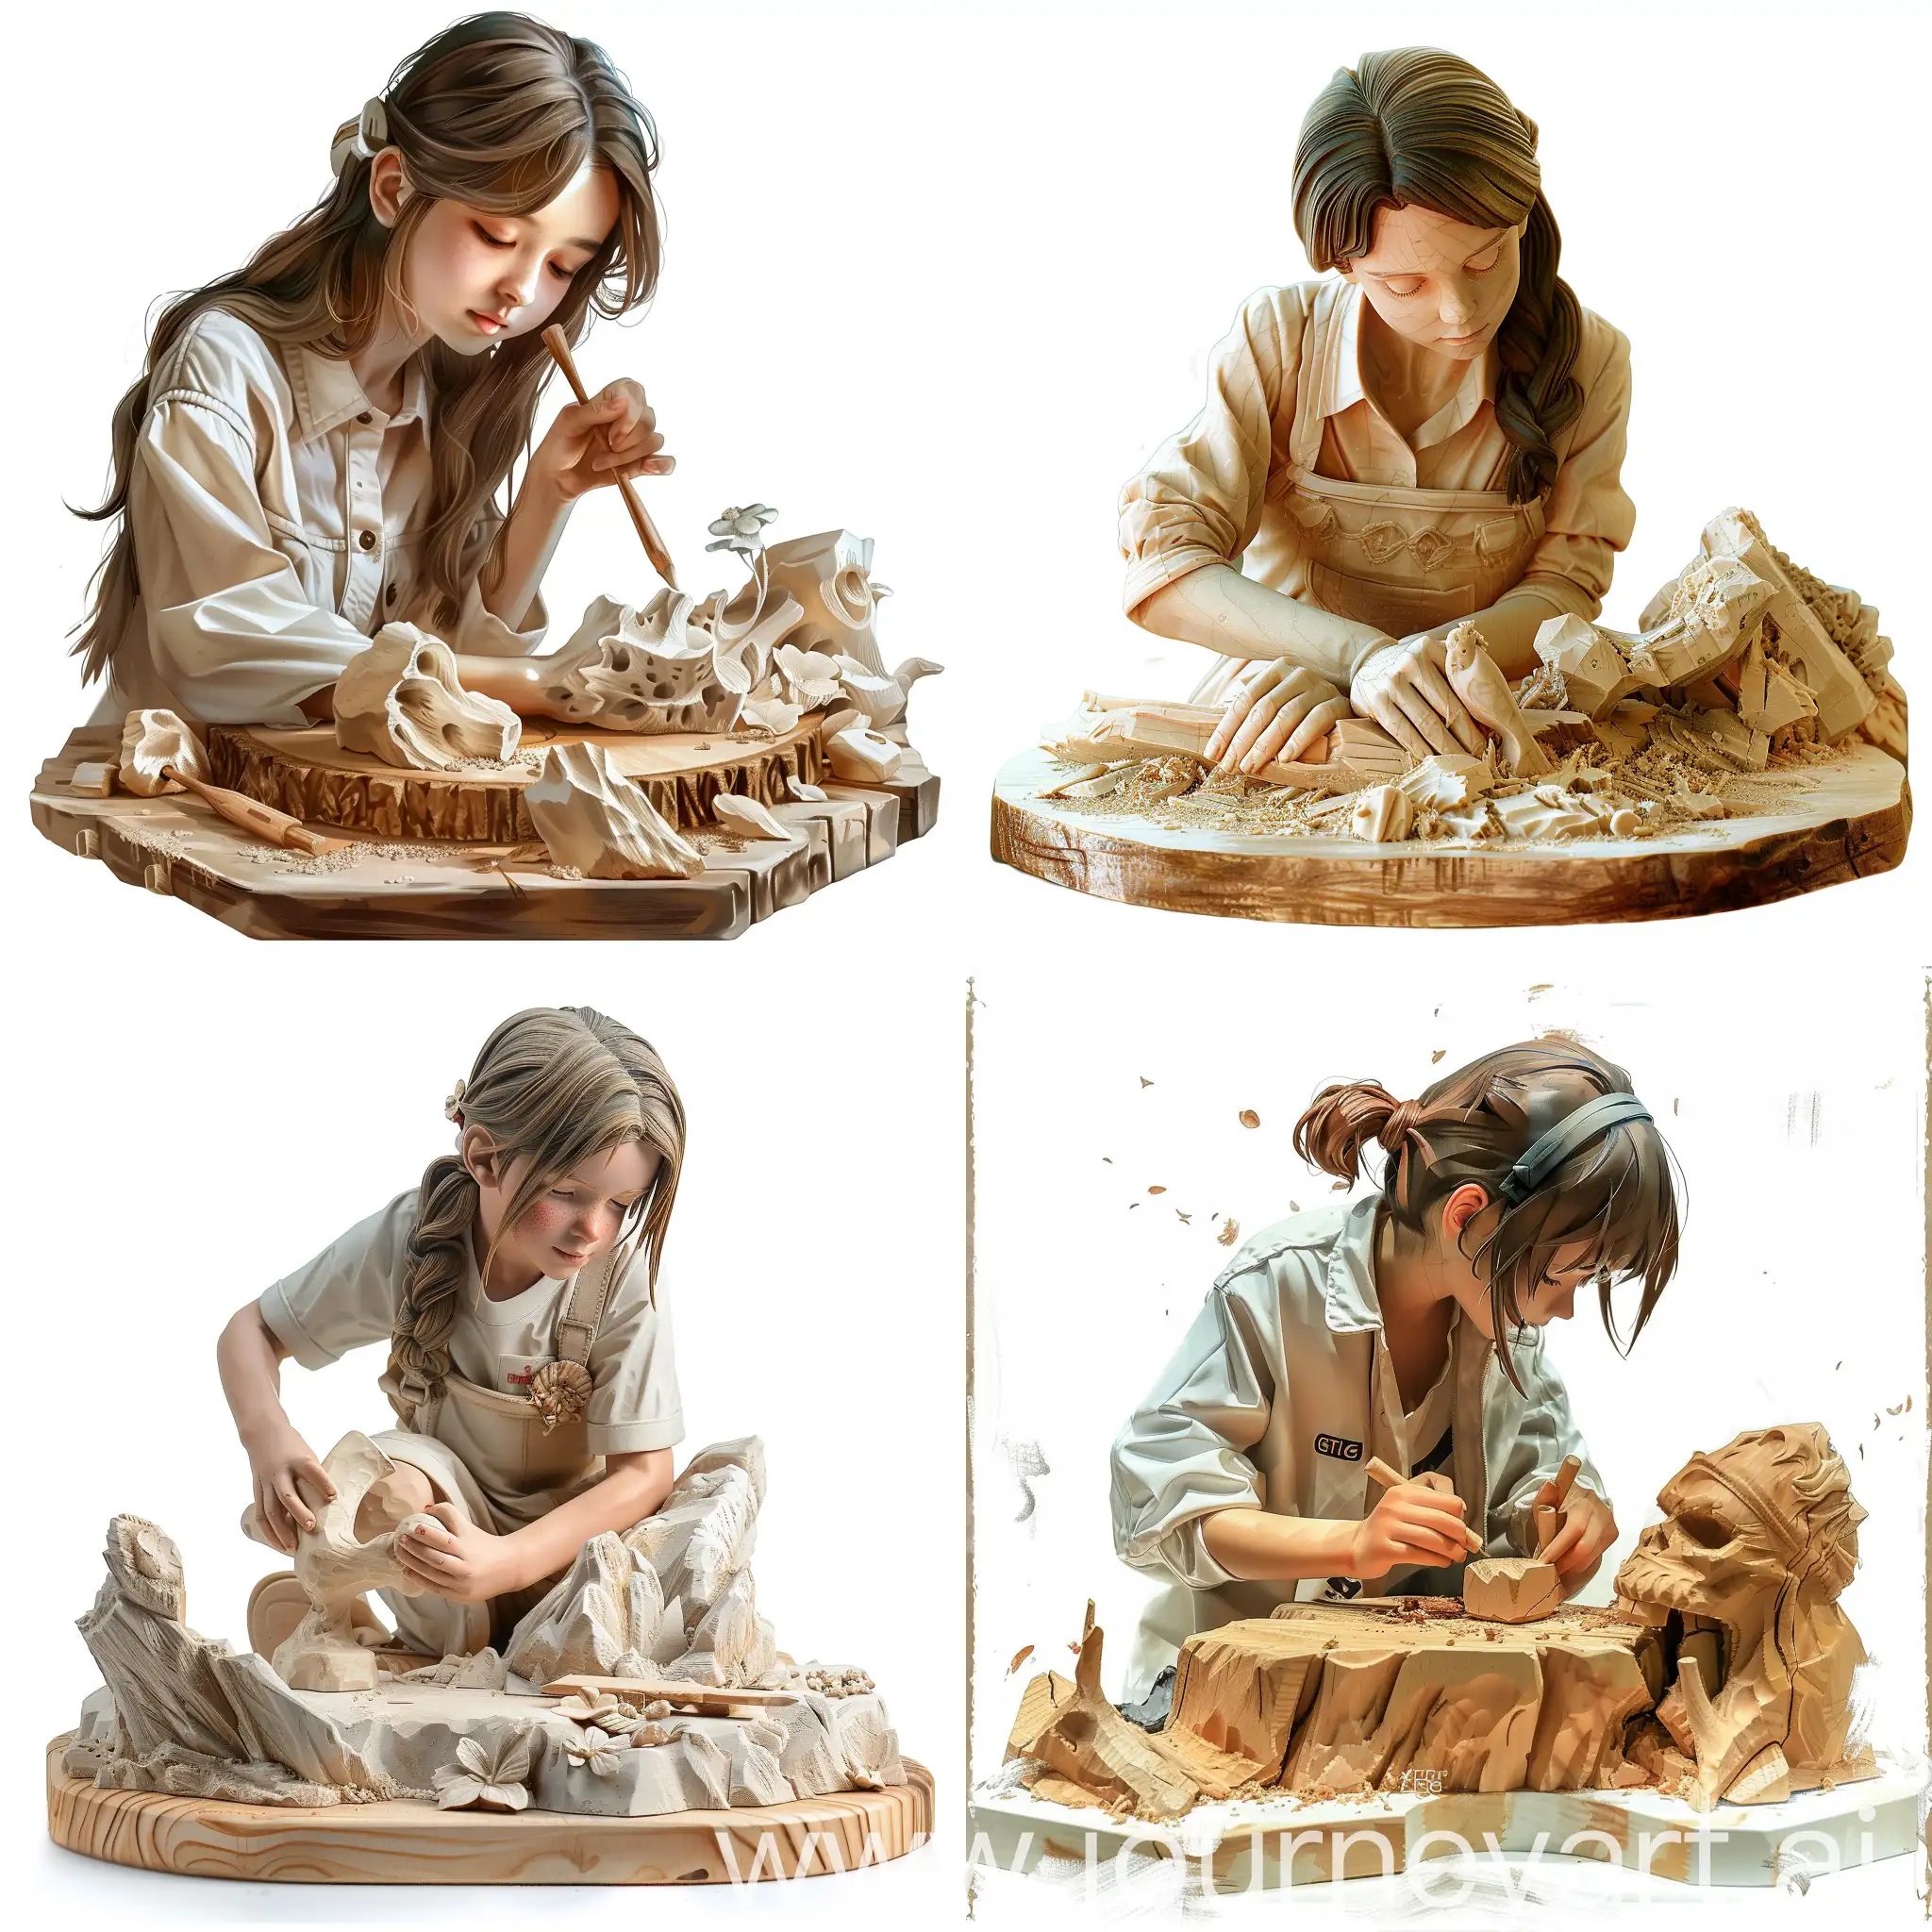 A GTI 6 style girl who is carving on wood and made a very nice sculpture. White background - very realistic